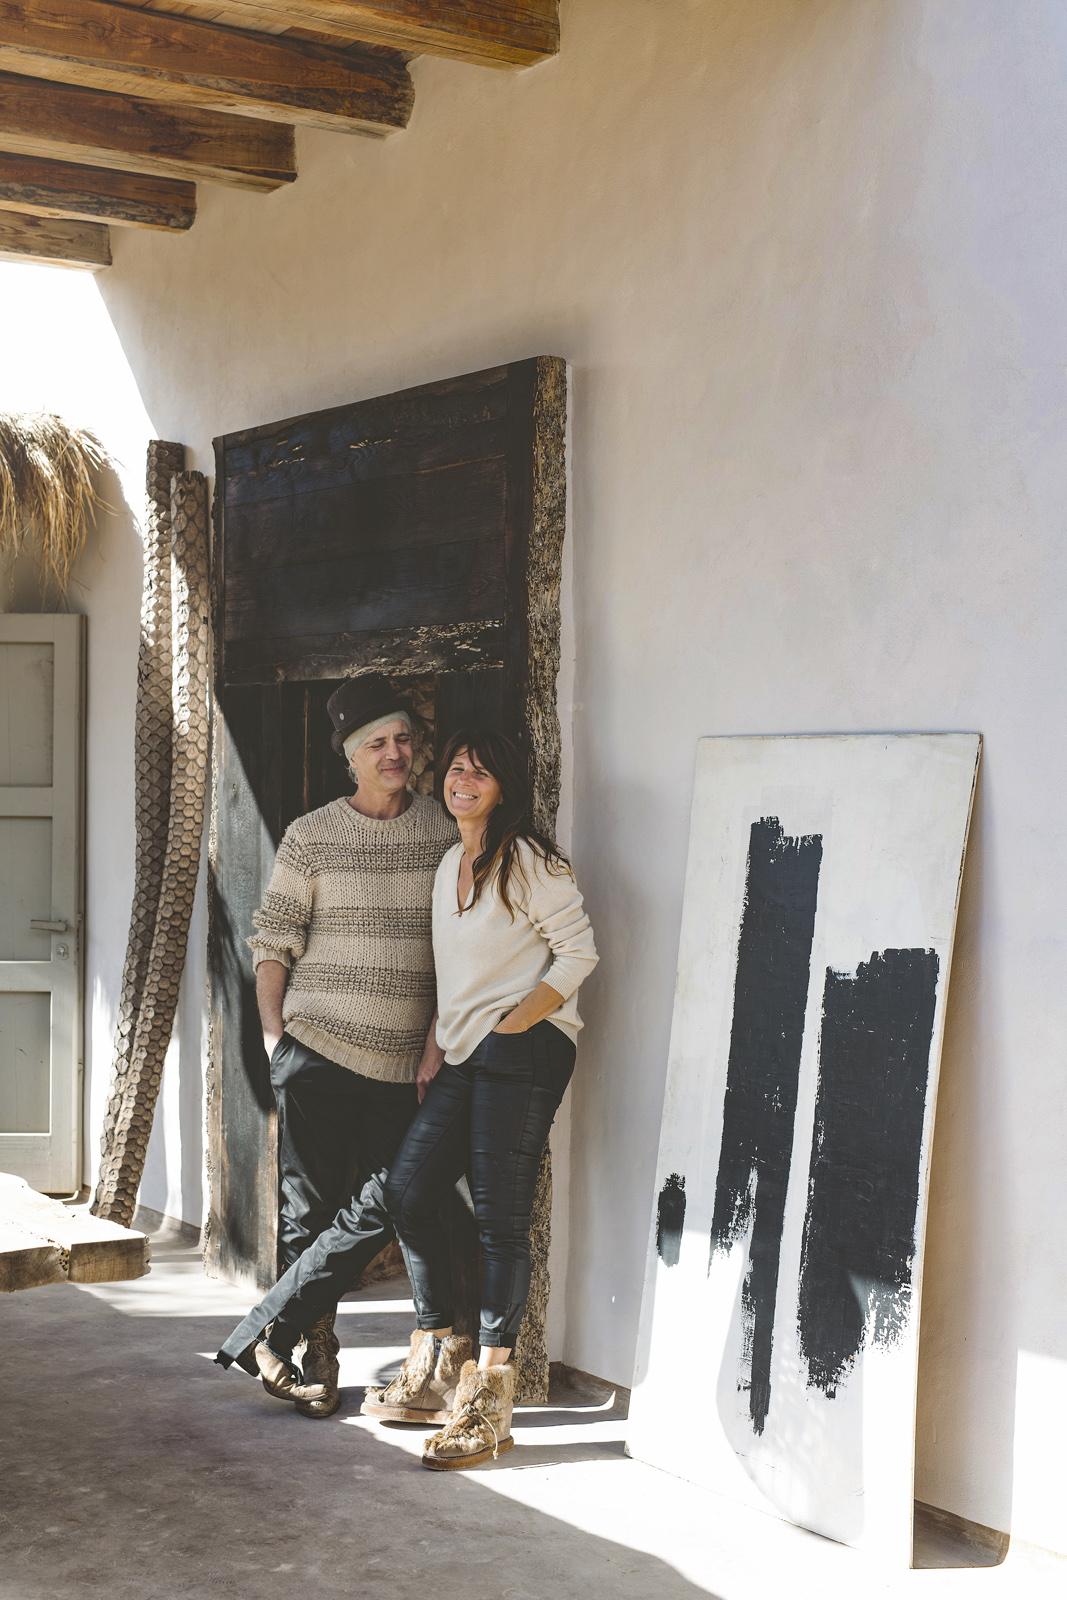 David Chianese &amp; Anna Tassini from Indigo Architecture photographed by Ana Lui